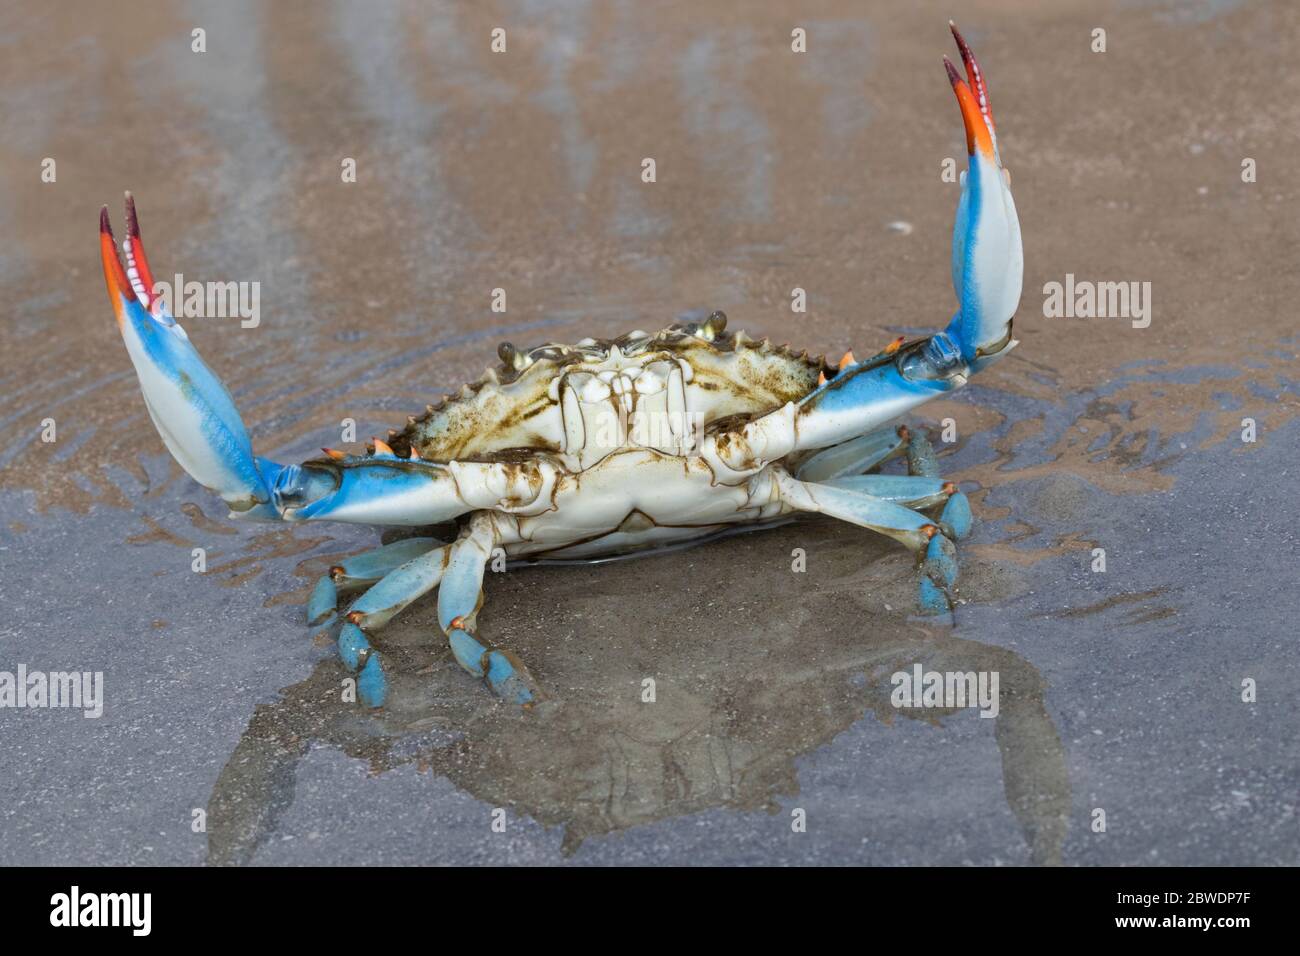 Atlantic Blue Crab High Resolution Stock Photography and Images - Alamy